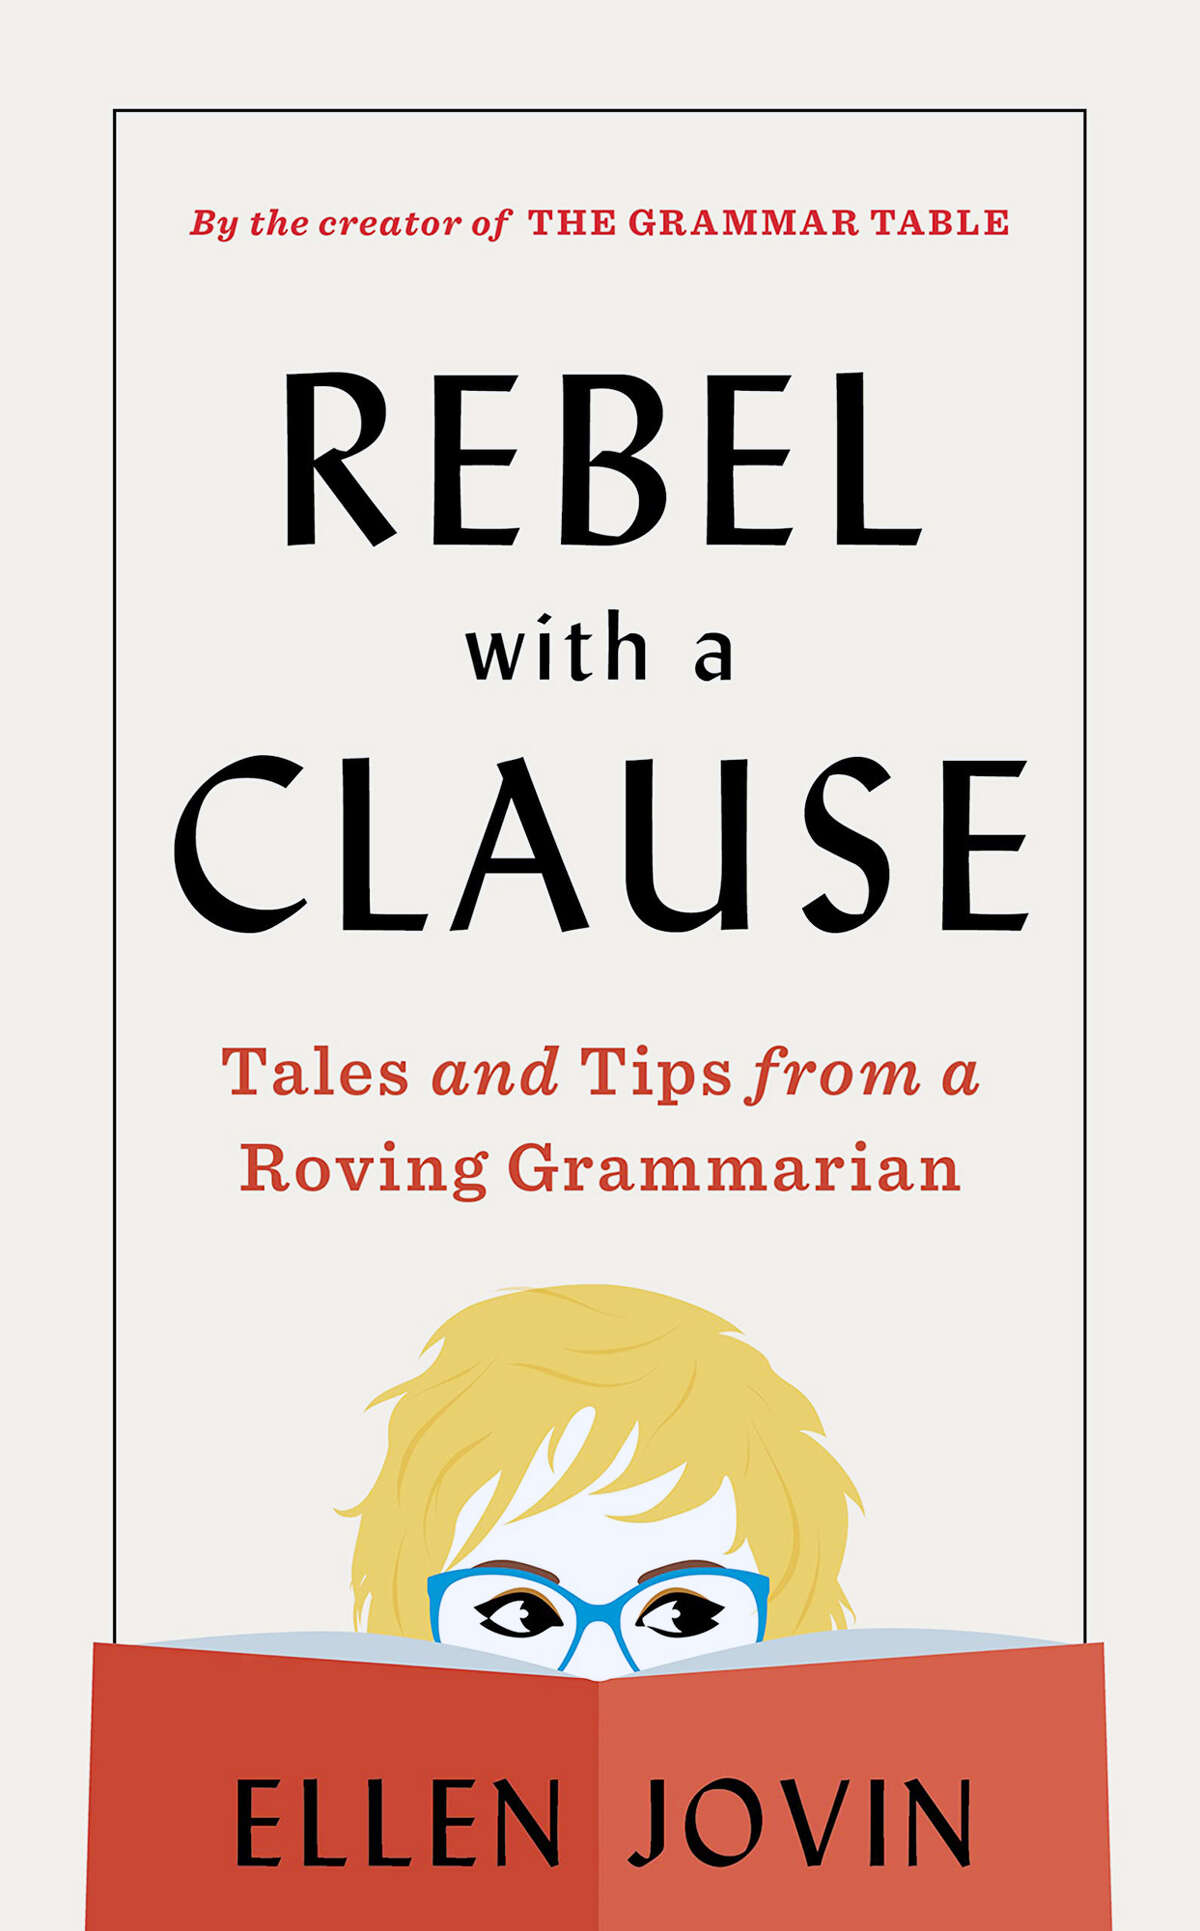 "Rebel with a Clause"